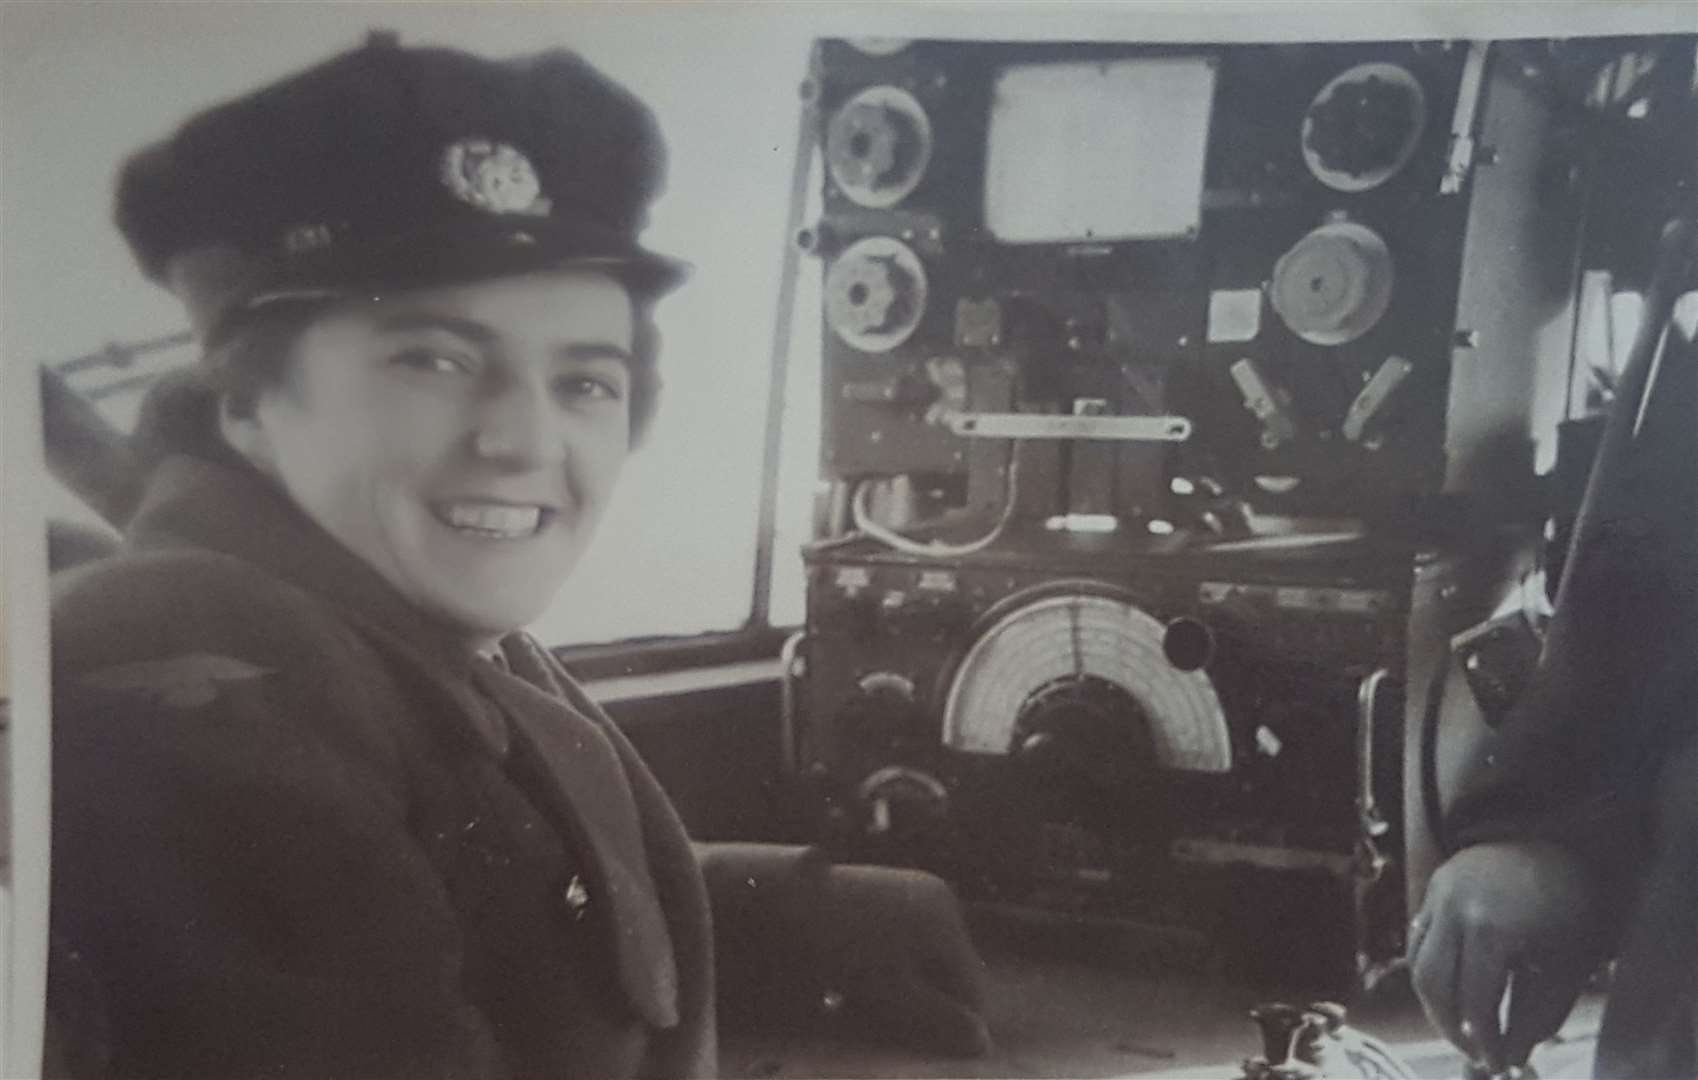 Dorothy King in her WAAF uniform in an aircraft